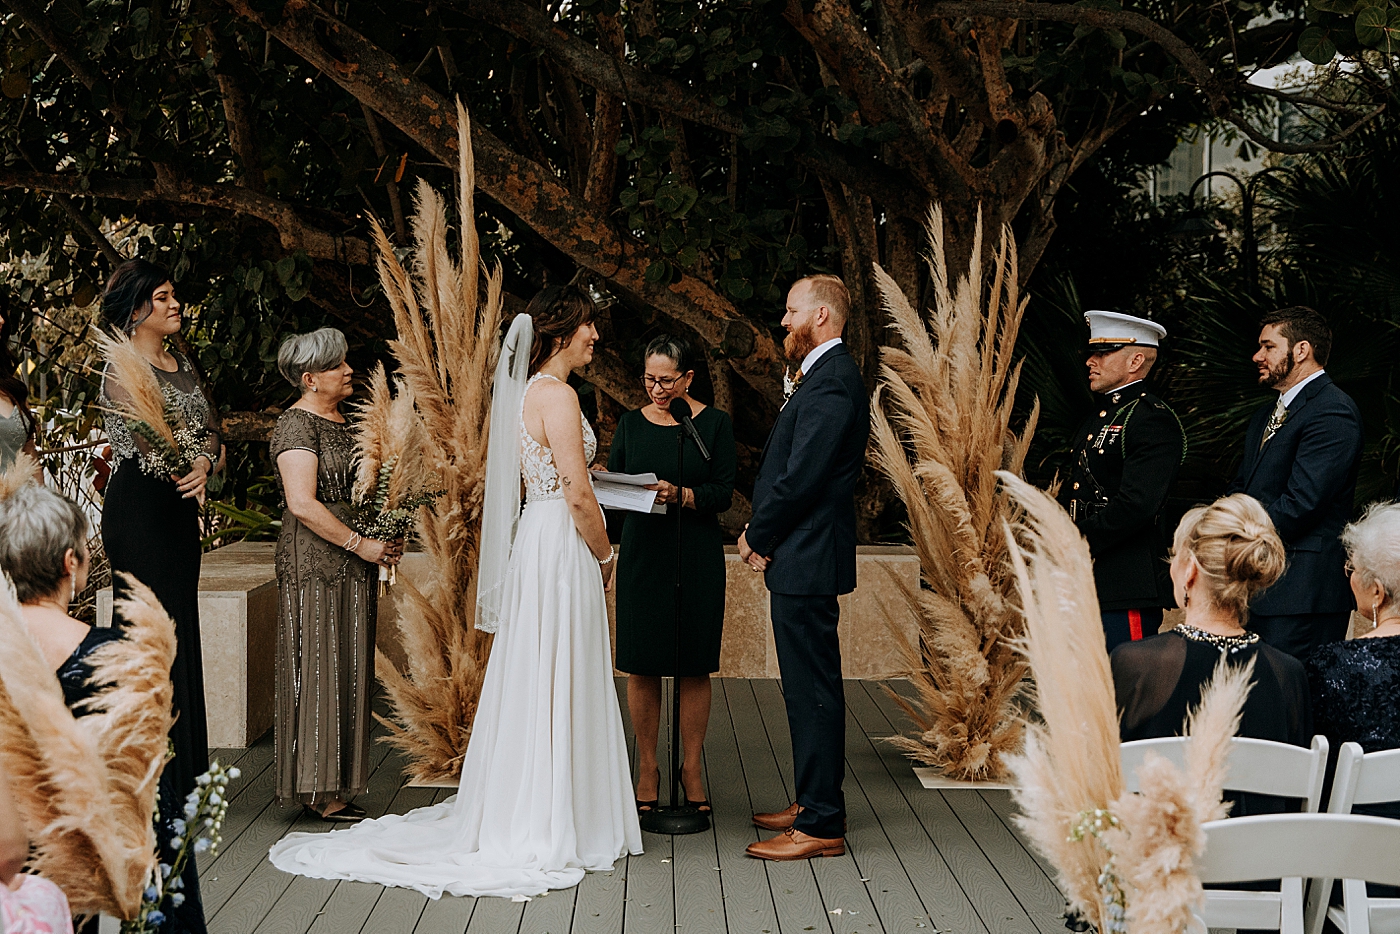 Bride exchanging vows Historic Stranahan House Wedding Photography captured by South Florida Wedding Photographer Maggie Alvarez Photography